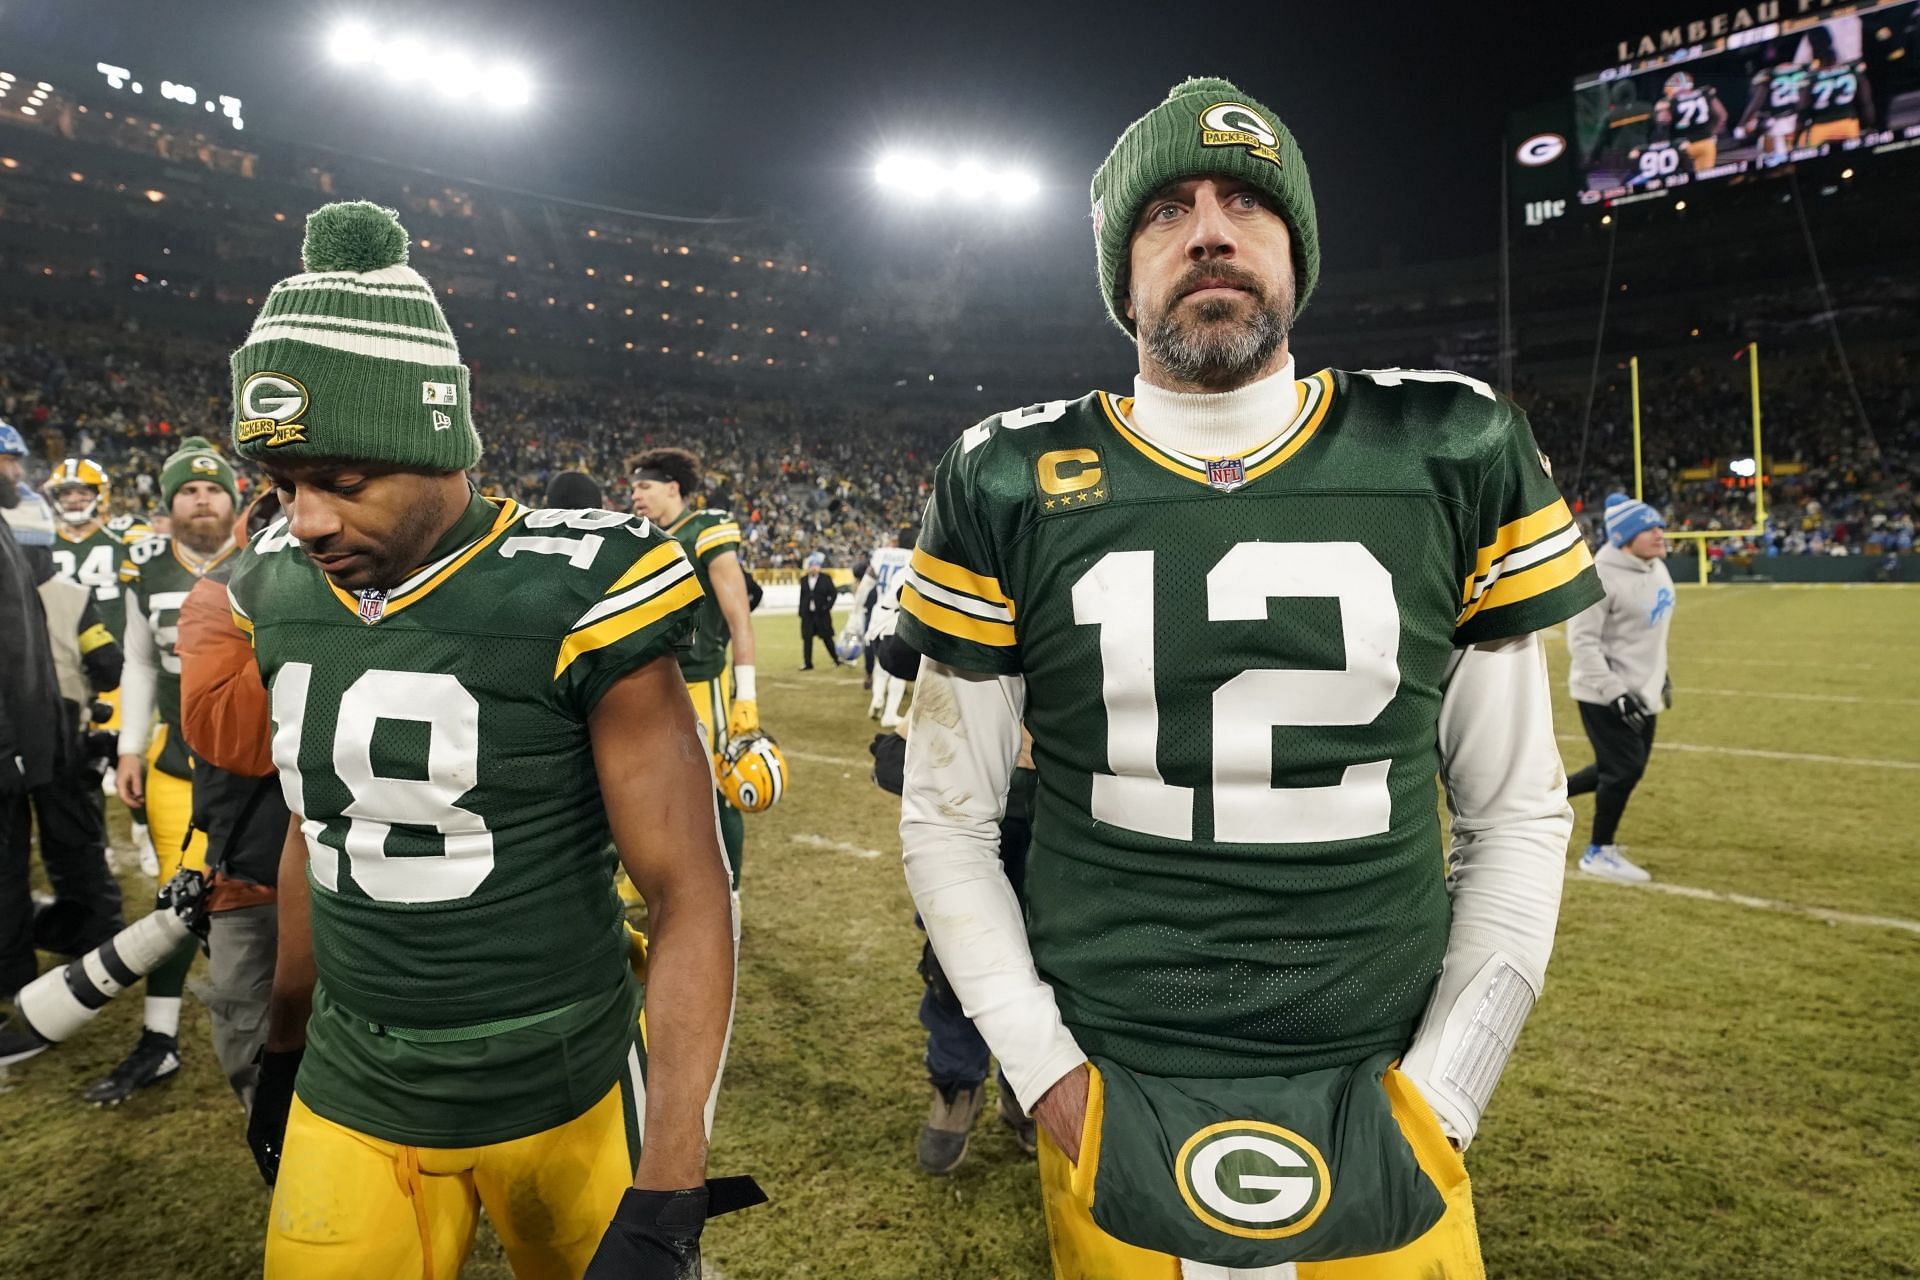 Aaron Rodgers and Randall Cobb of the Green Bay Packers walk off the field